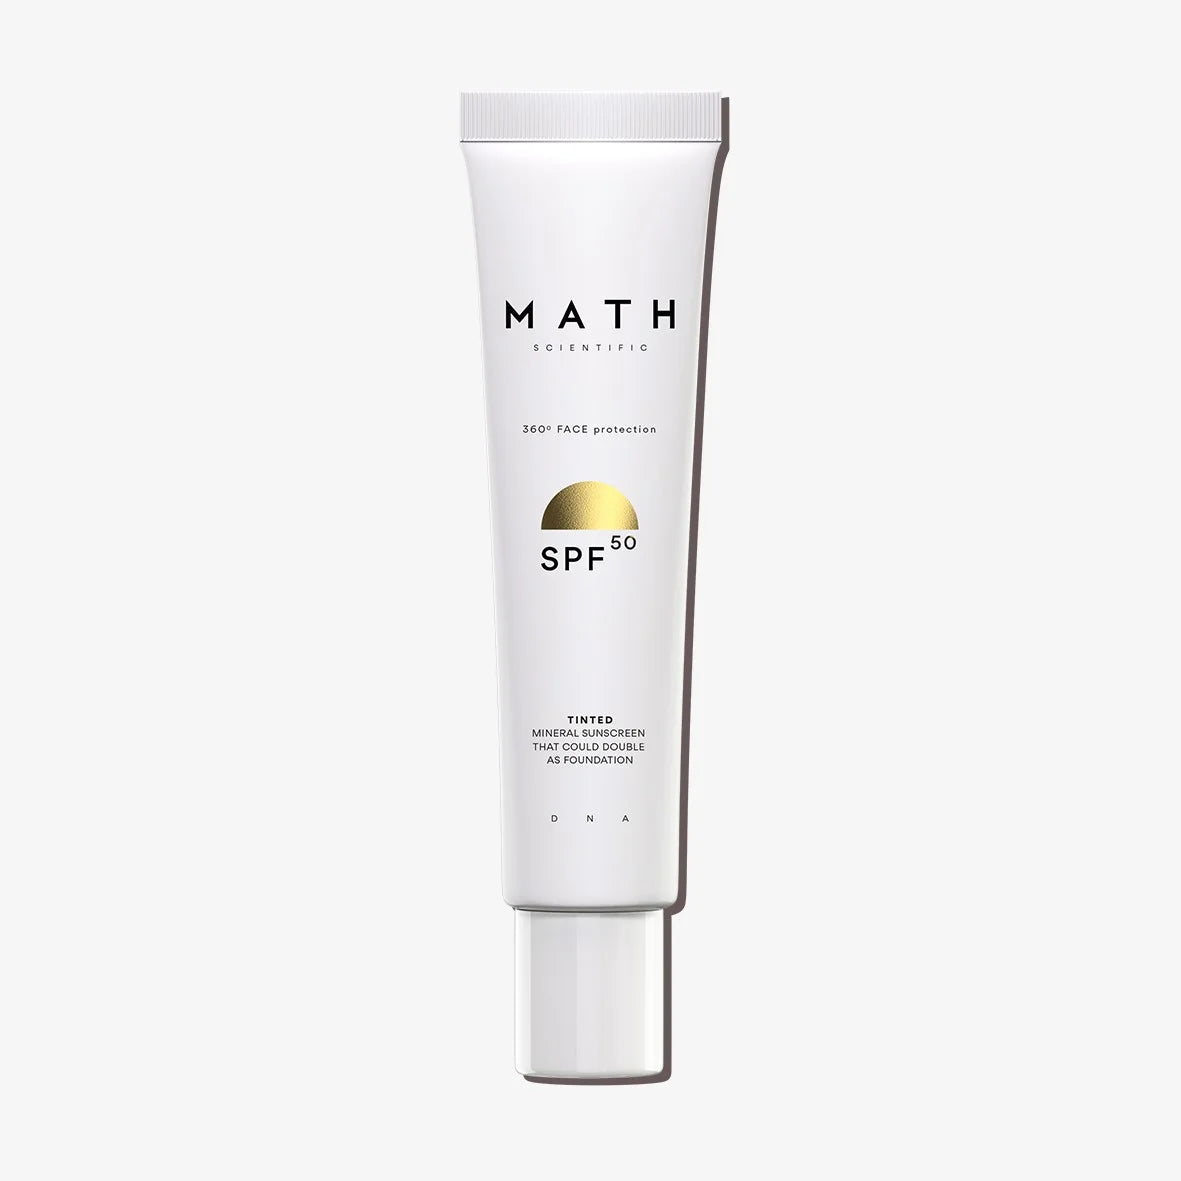 Tinted SPF50 mineral sunscreen